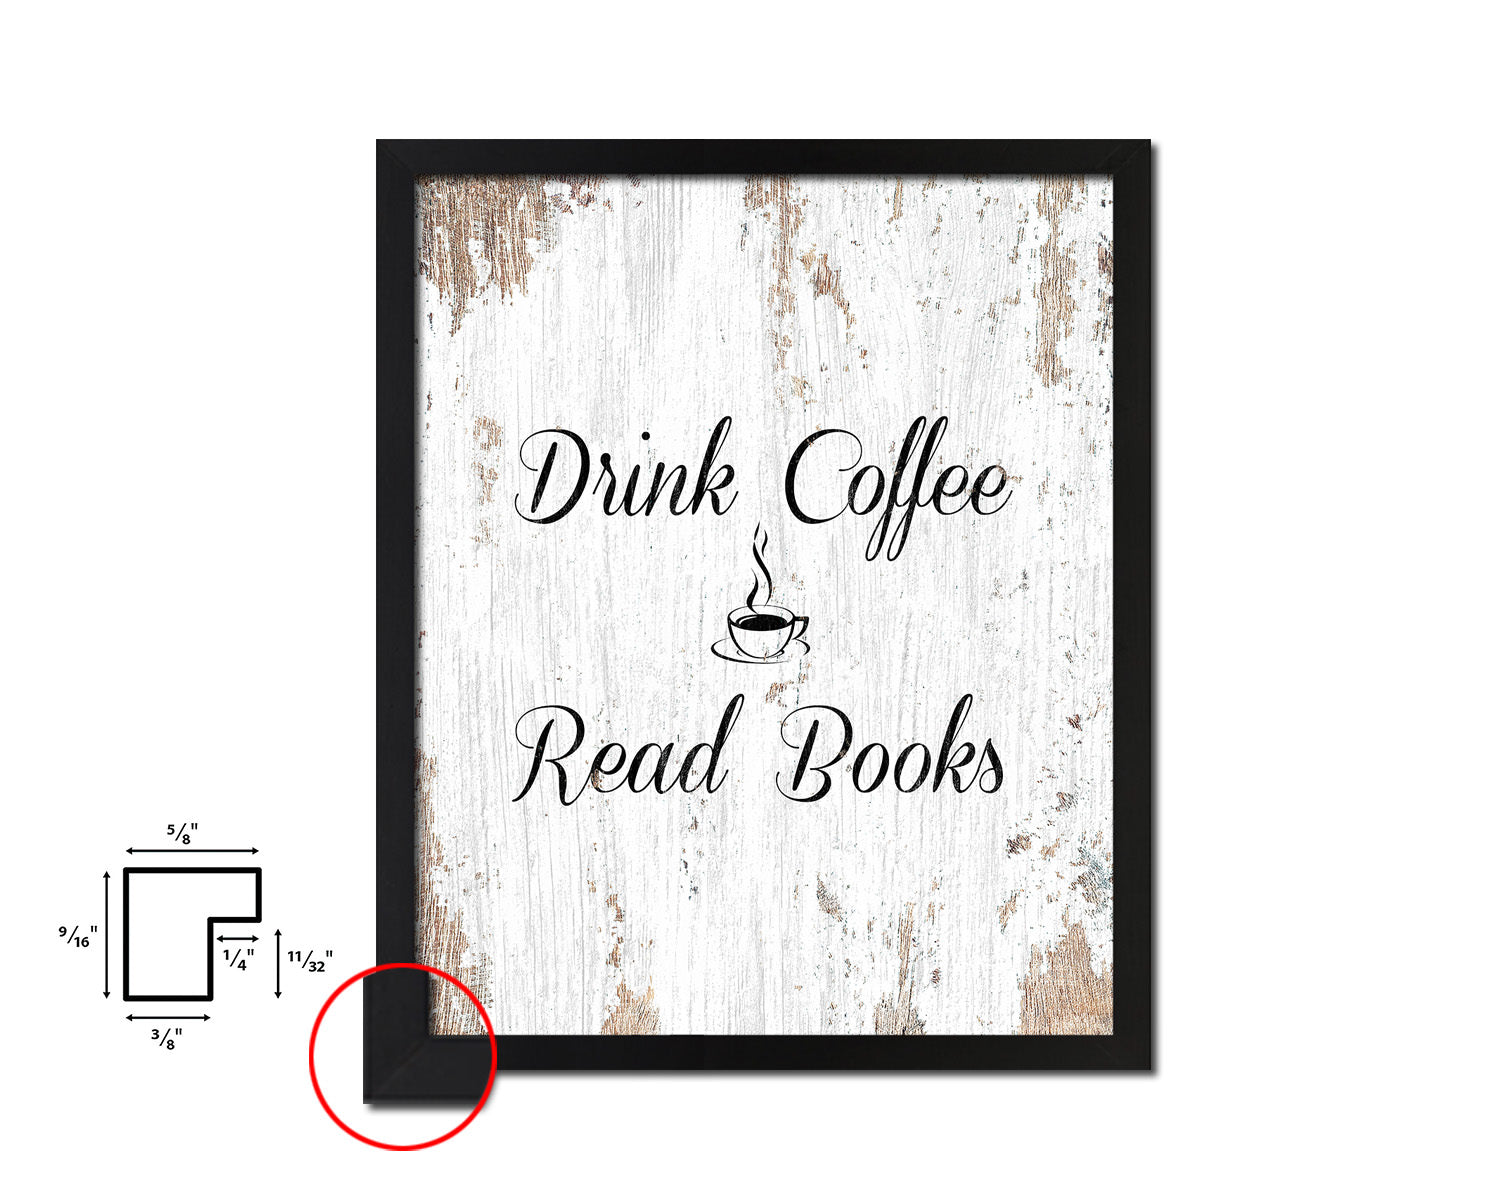 Drink coffee read books Quote Framed Artwork Print Wall Decor Art Gifts